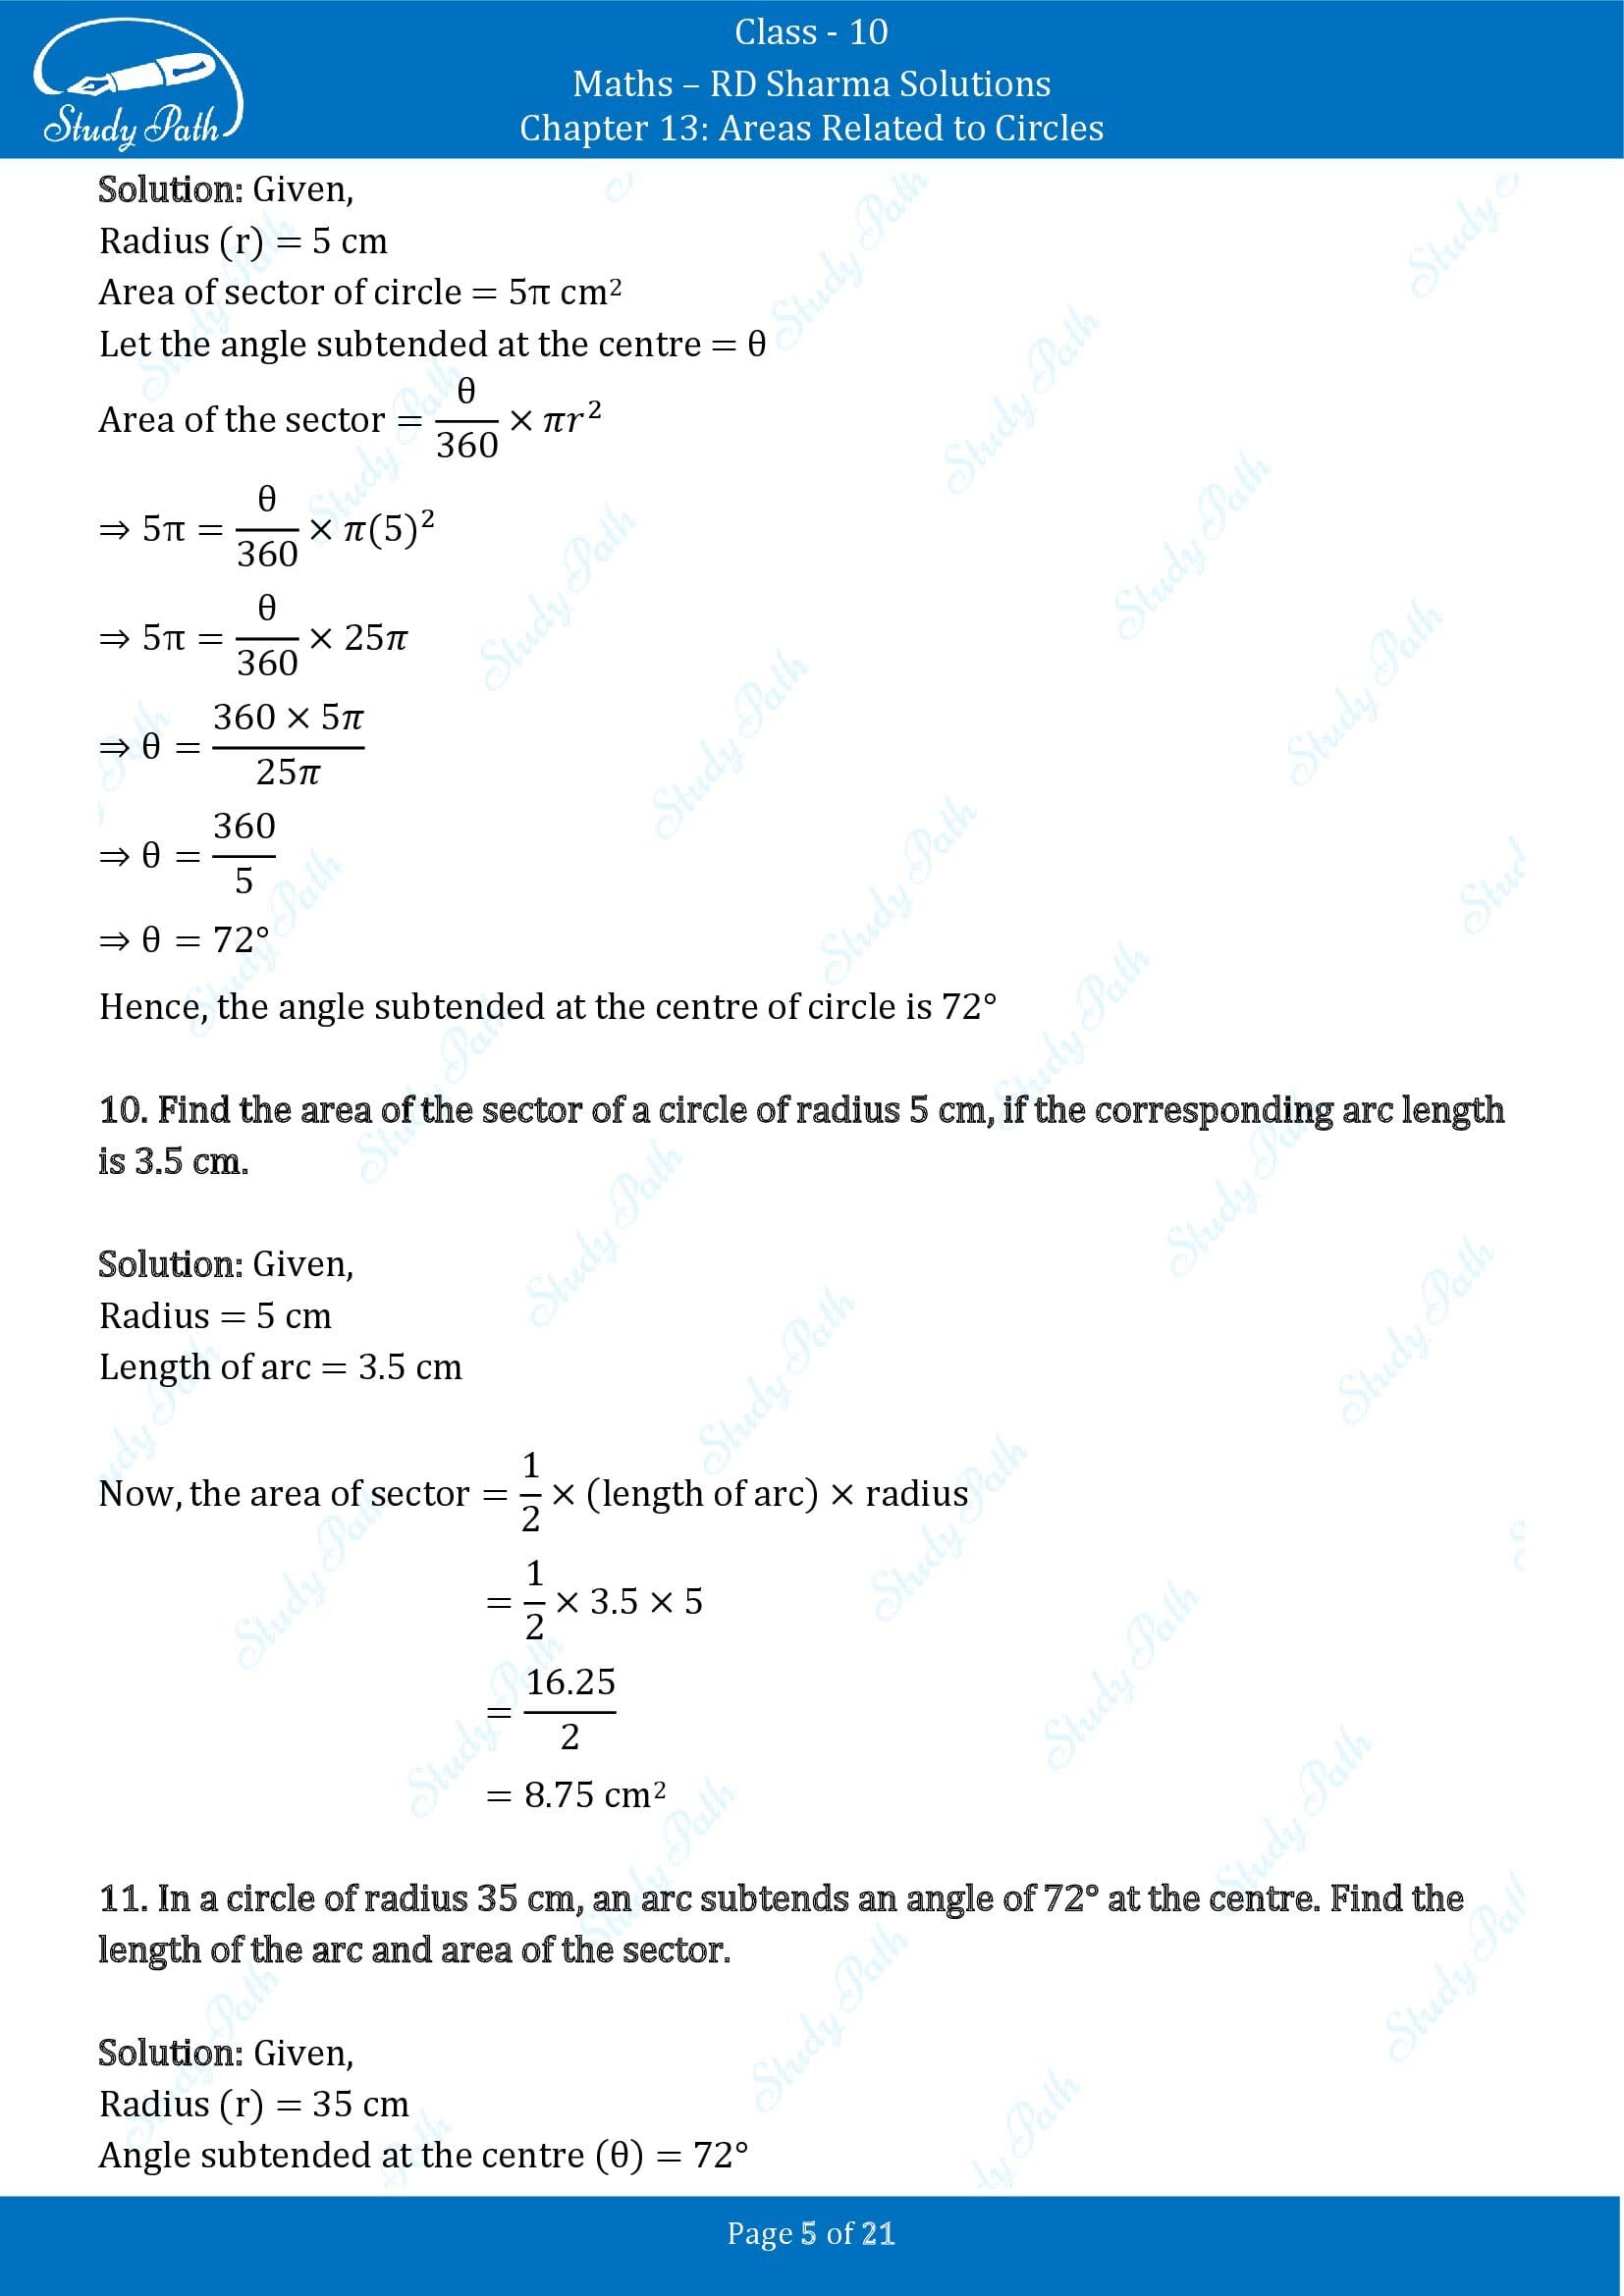 RD Sharma Solutions Class 10 Chapter 13 Areas Related to Circles Exercise 13.2 00005